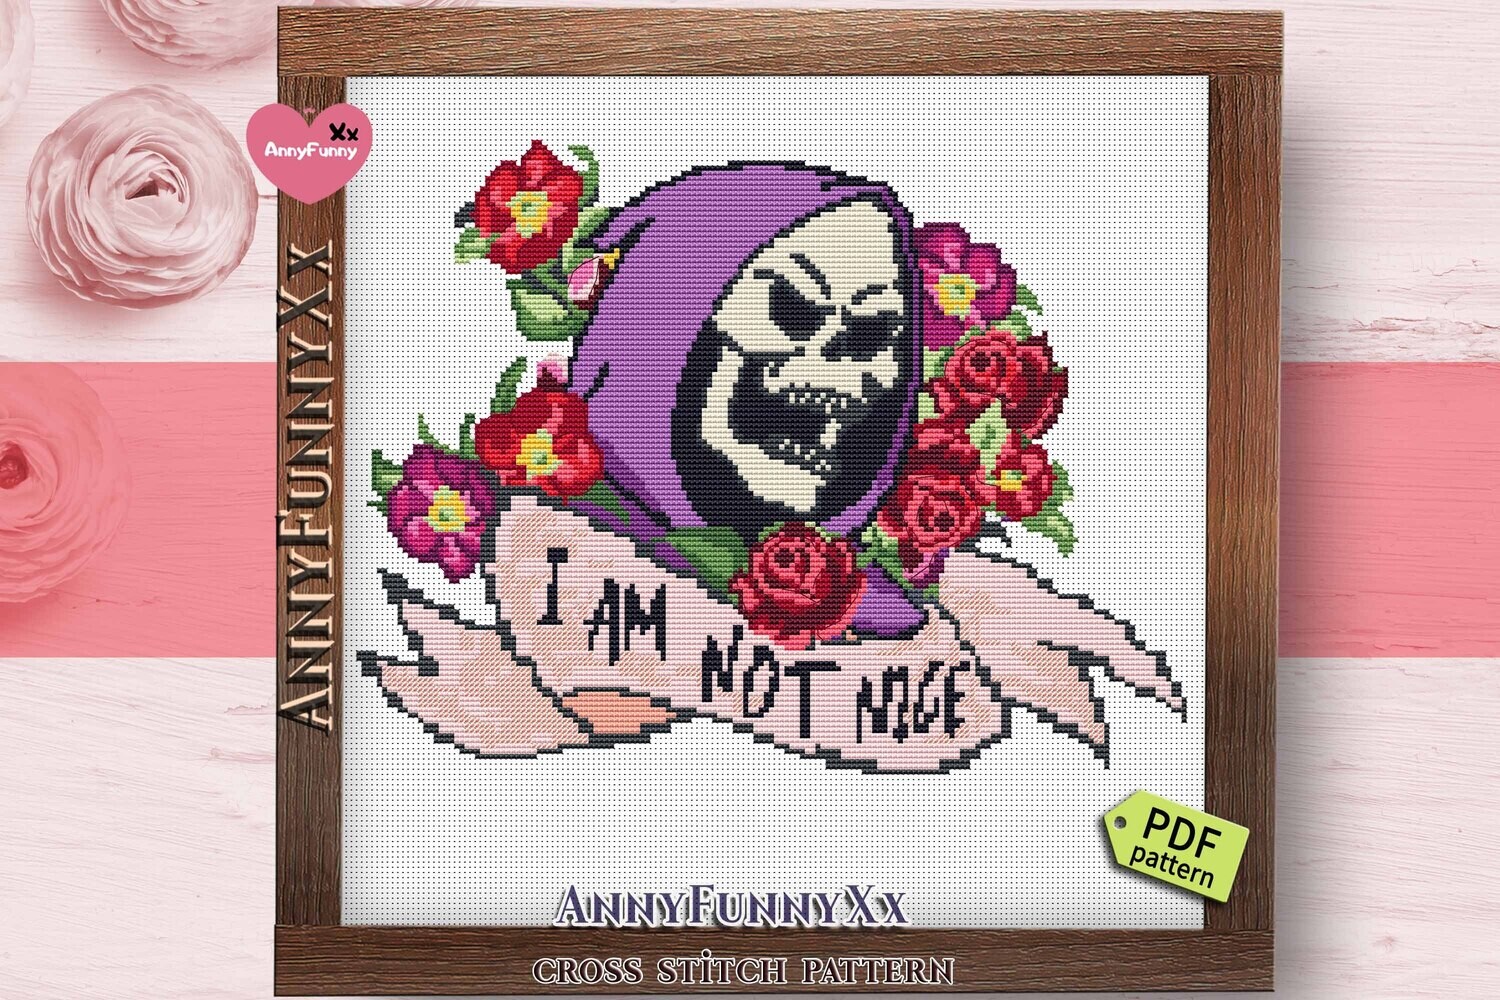 Live Laugh Love Cross stitch pattern PDF Skeleton flowers Funny Subversive I am not nice, DIY Gift for dad Fantasy gifts for boyfriend